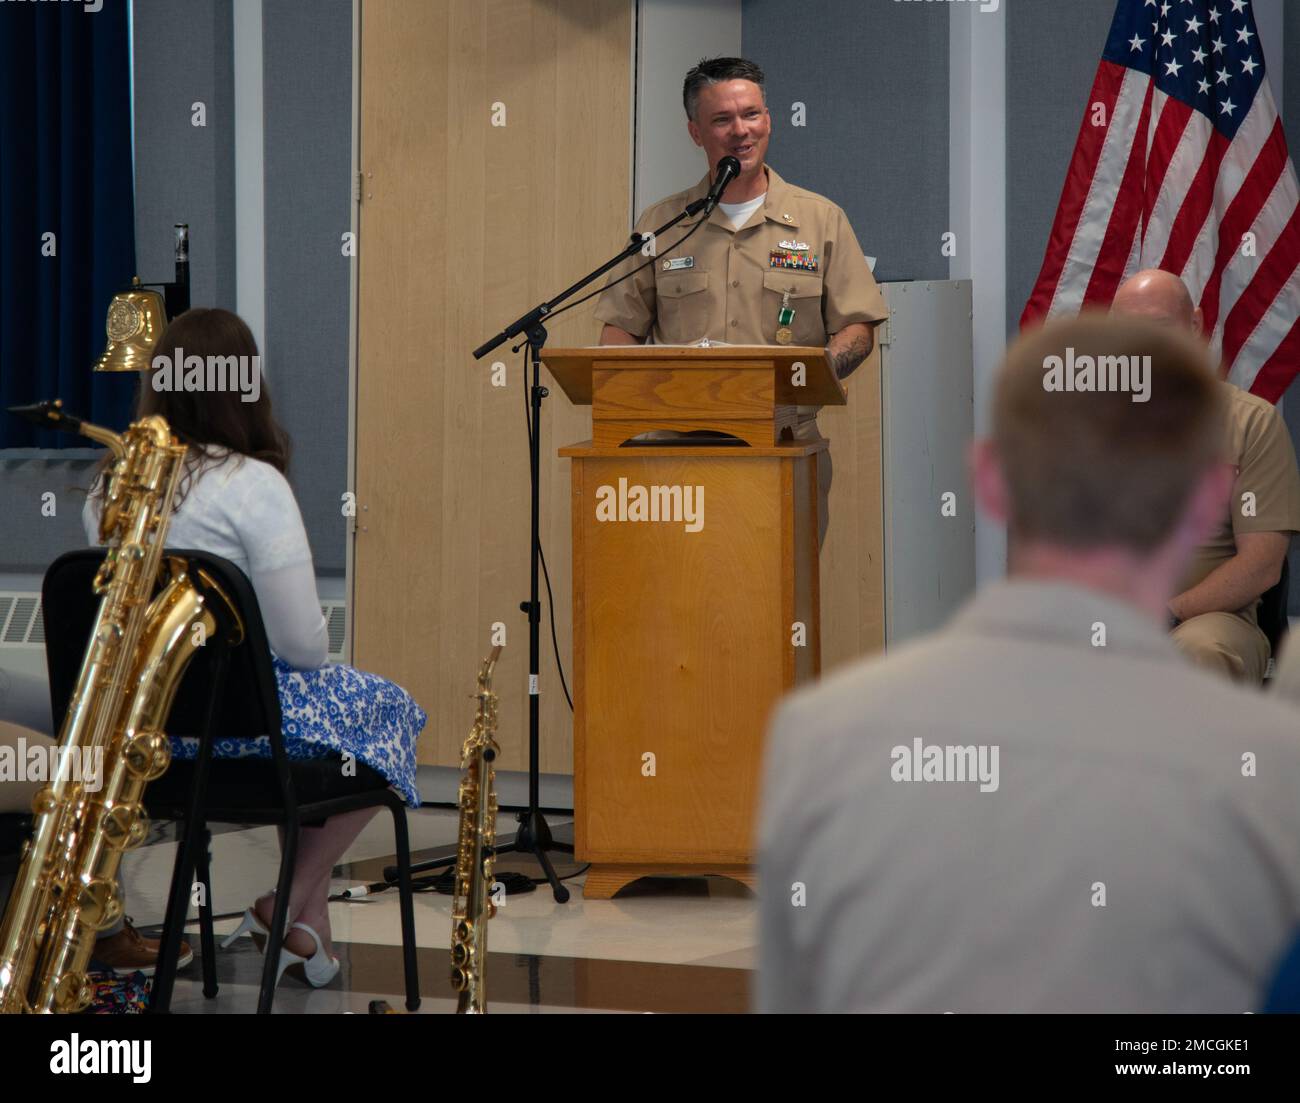 NEWPORT, R.I. (July 1, 2022) Master Chief Musician Gresh Laing gives remarks during his retirement ceremony on Naval Station Newport, July 1, 2022. The Naval School of Music plays a vital role in developing the military musician, and its graduates go on to become musical ambassadors on ships and stations throughout the world. Stock Photo